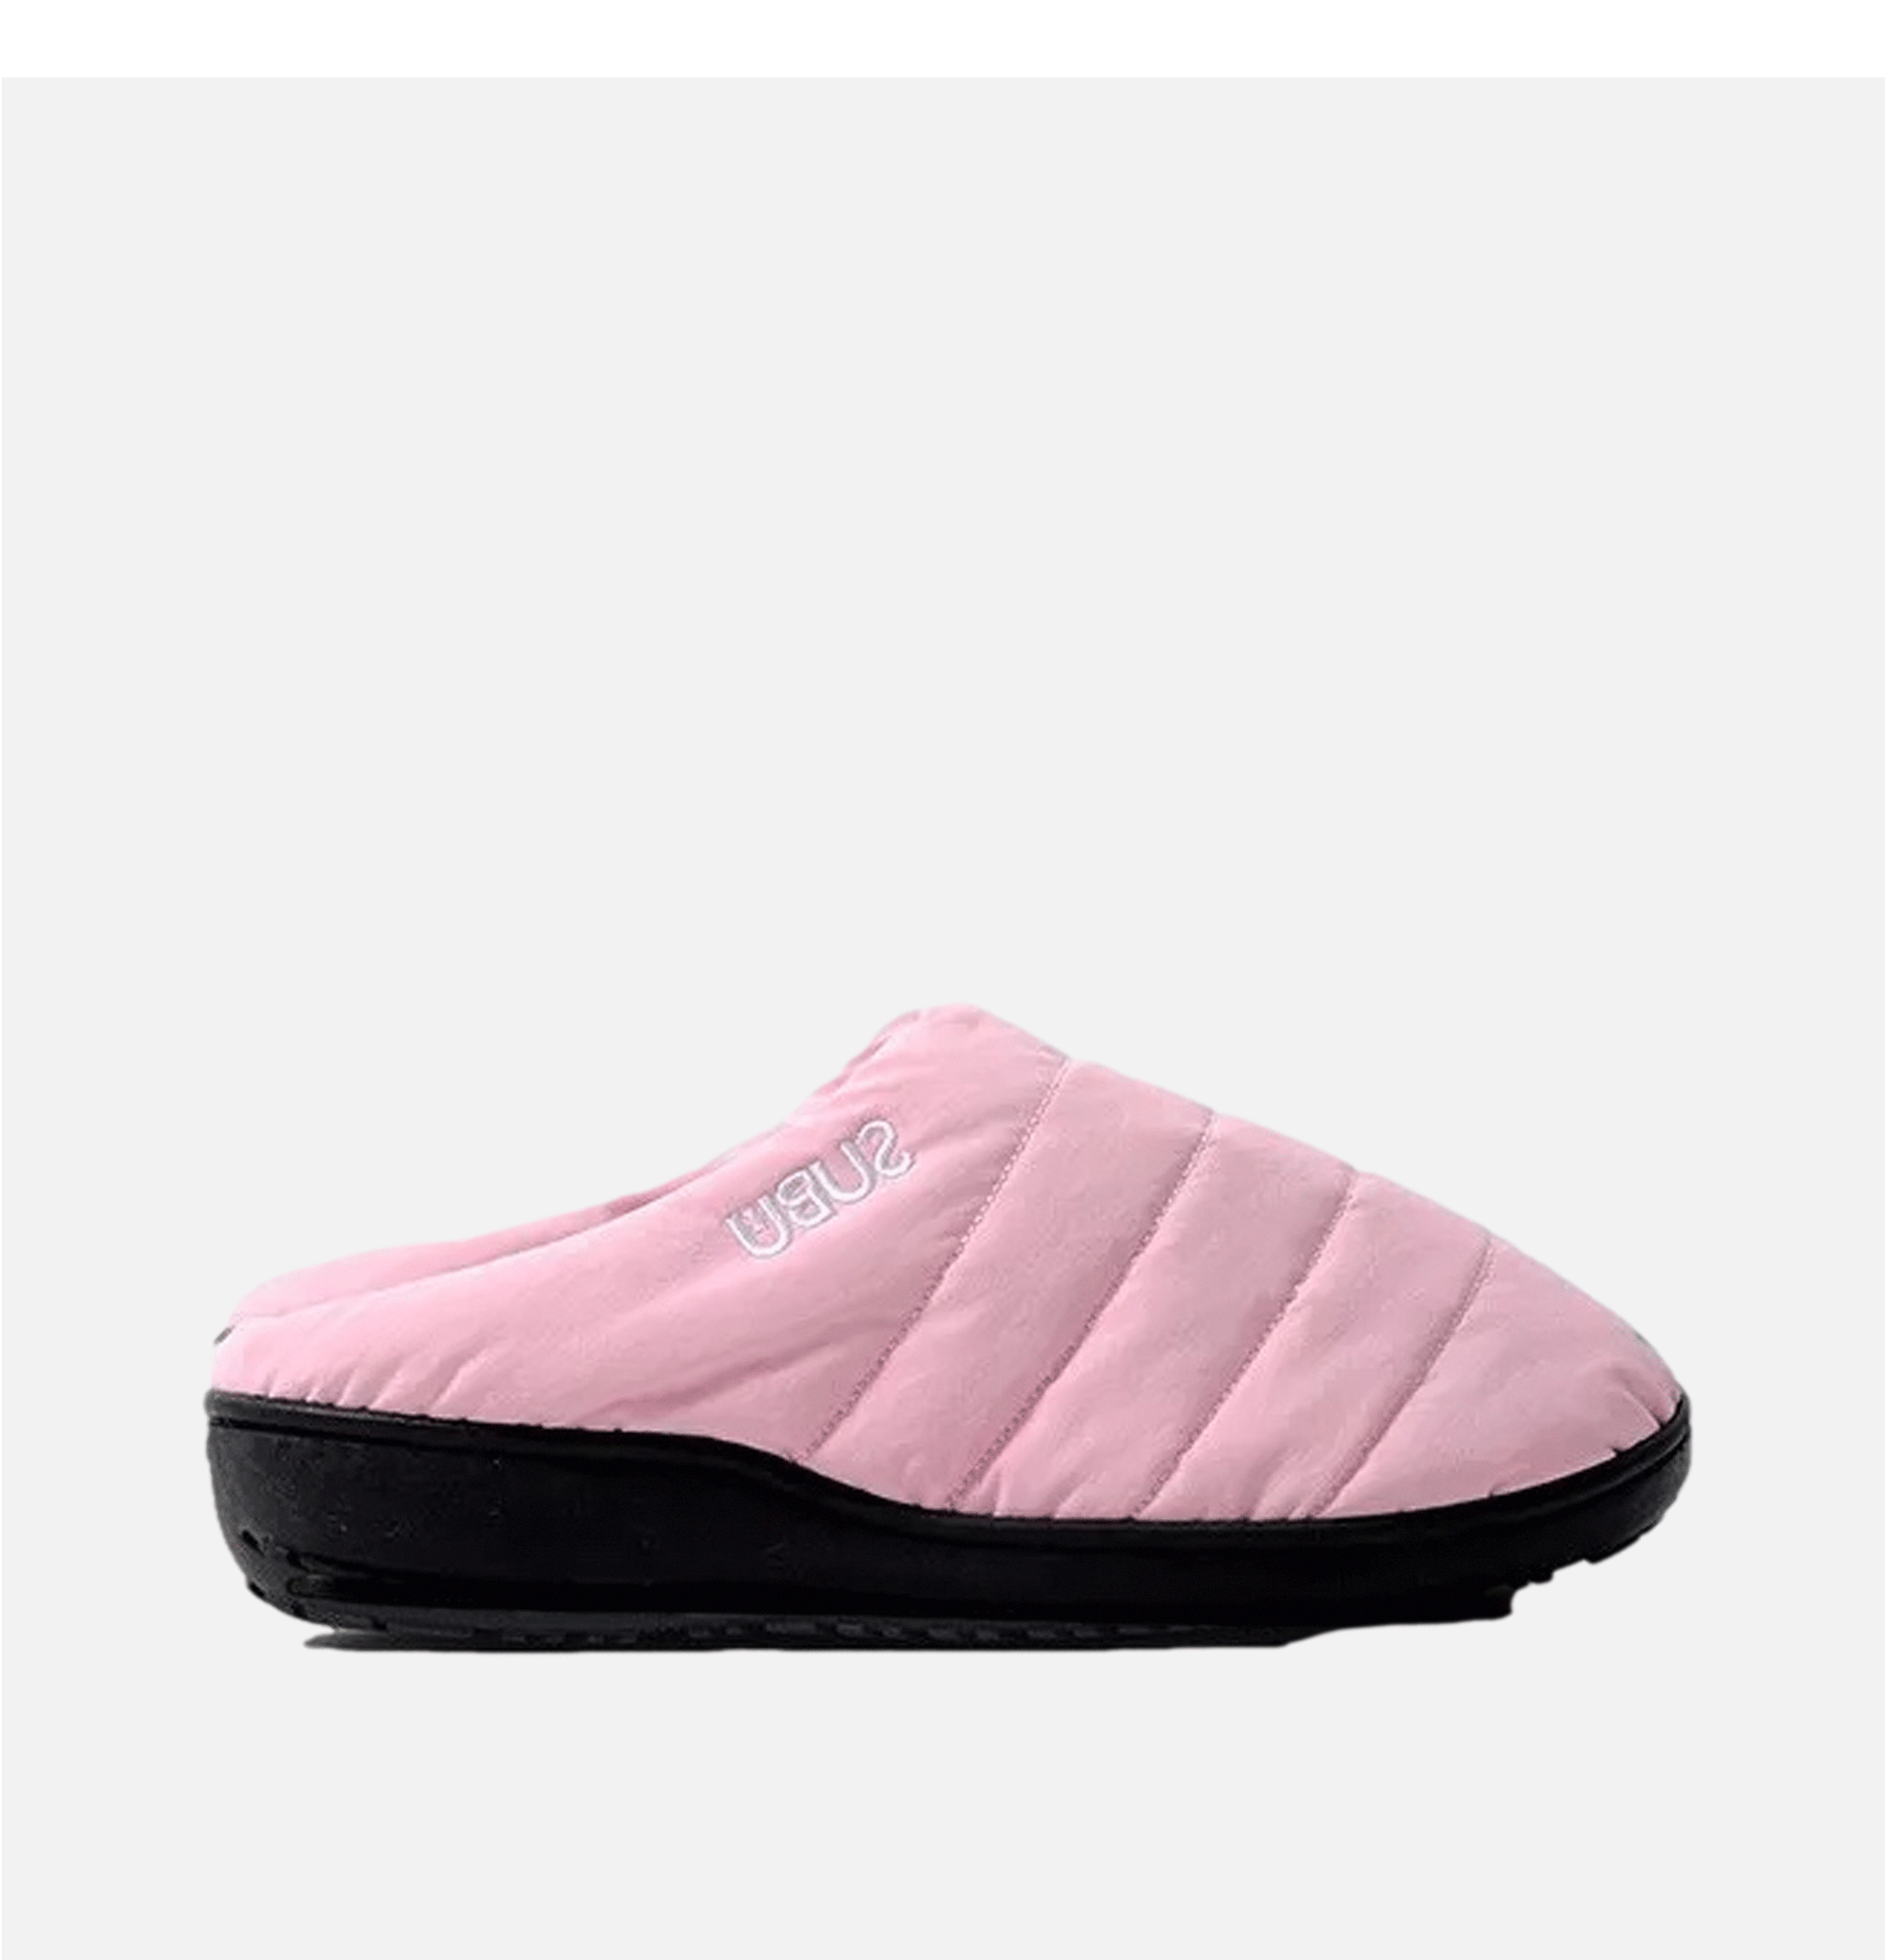 Chaussons Subu Tokyo Uneveness Pink.